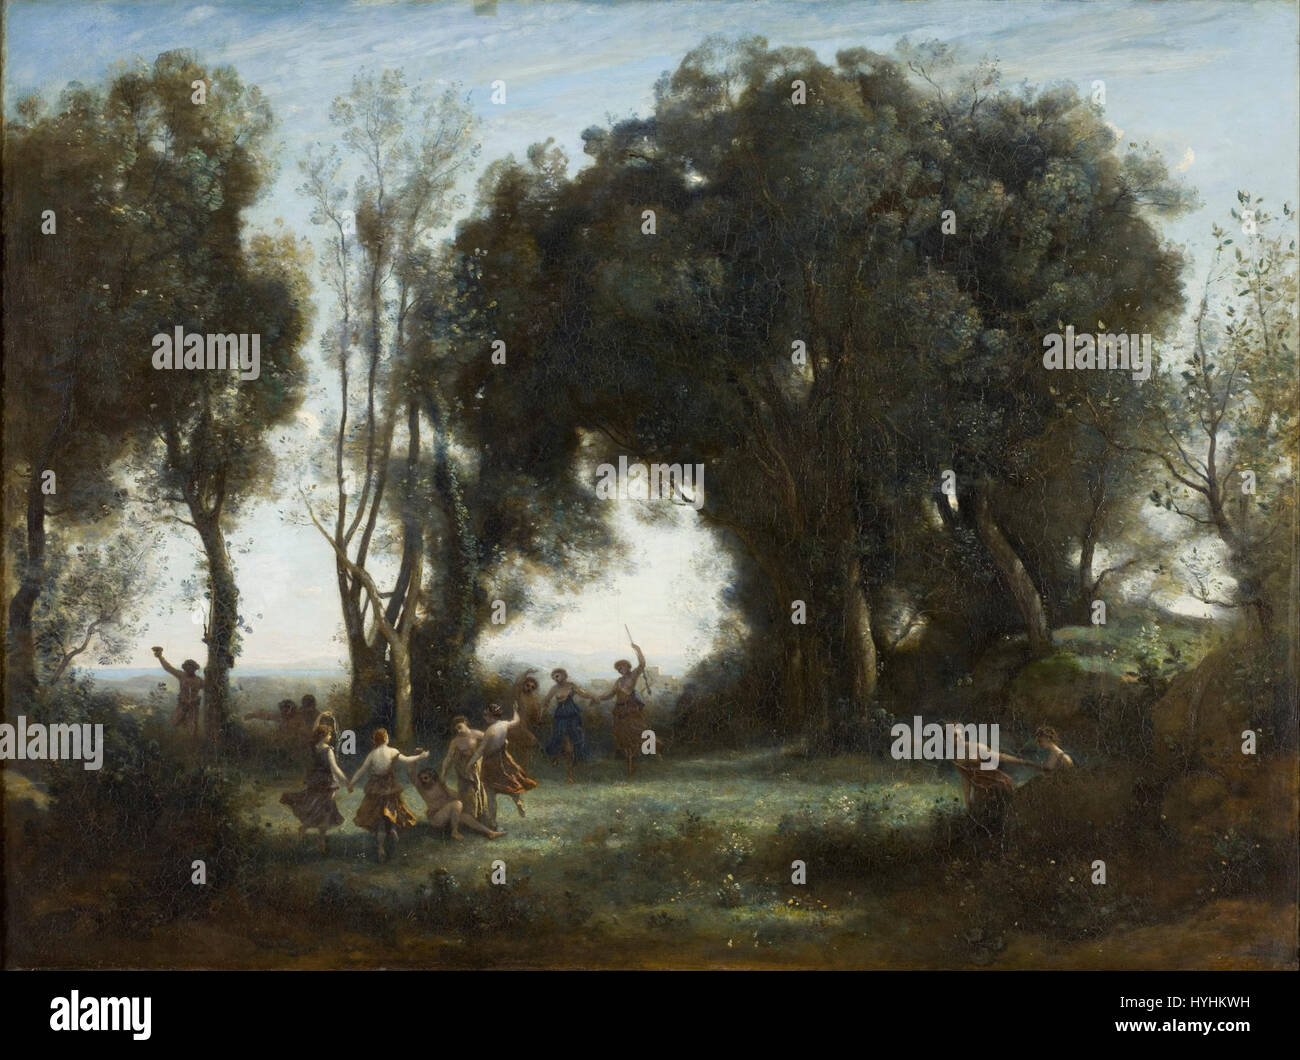 Camille Corot   A Morning. The Dance of the Nymphs   Google Art Project Stock Photo